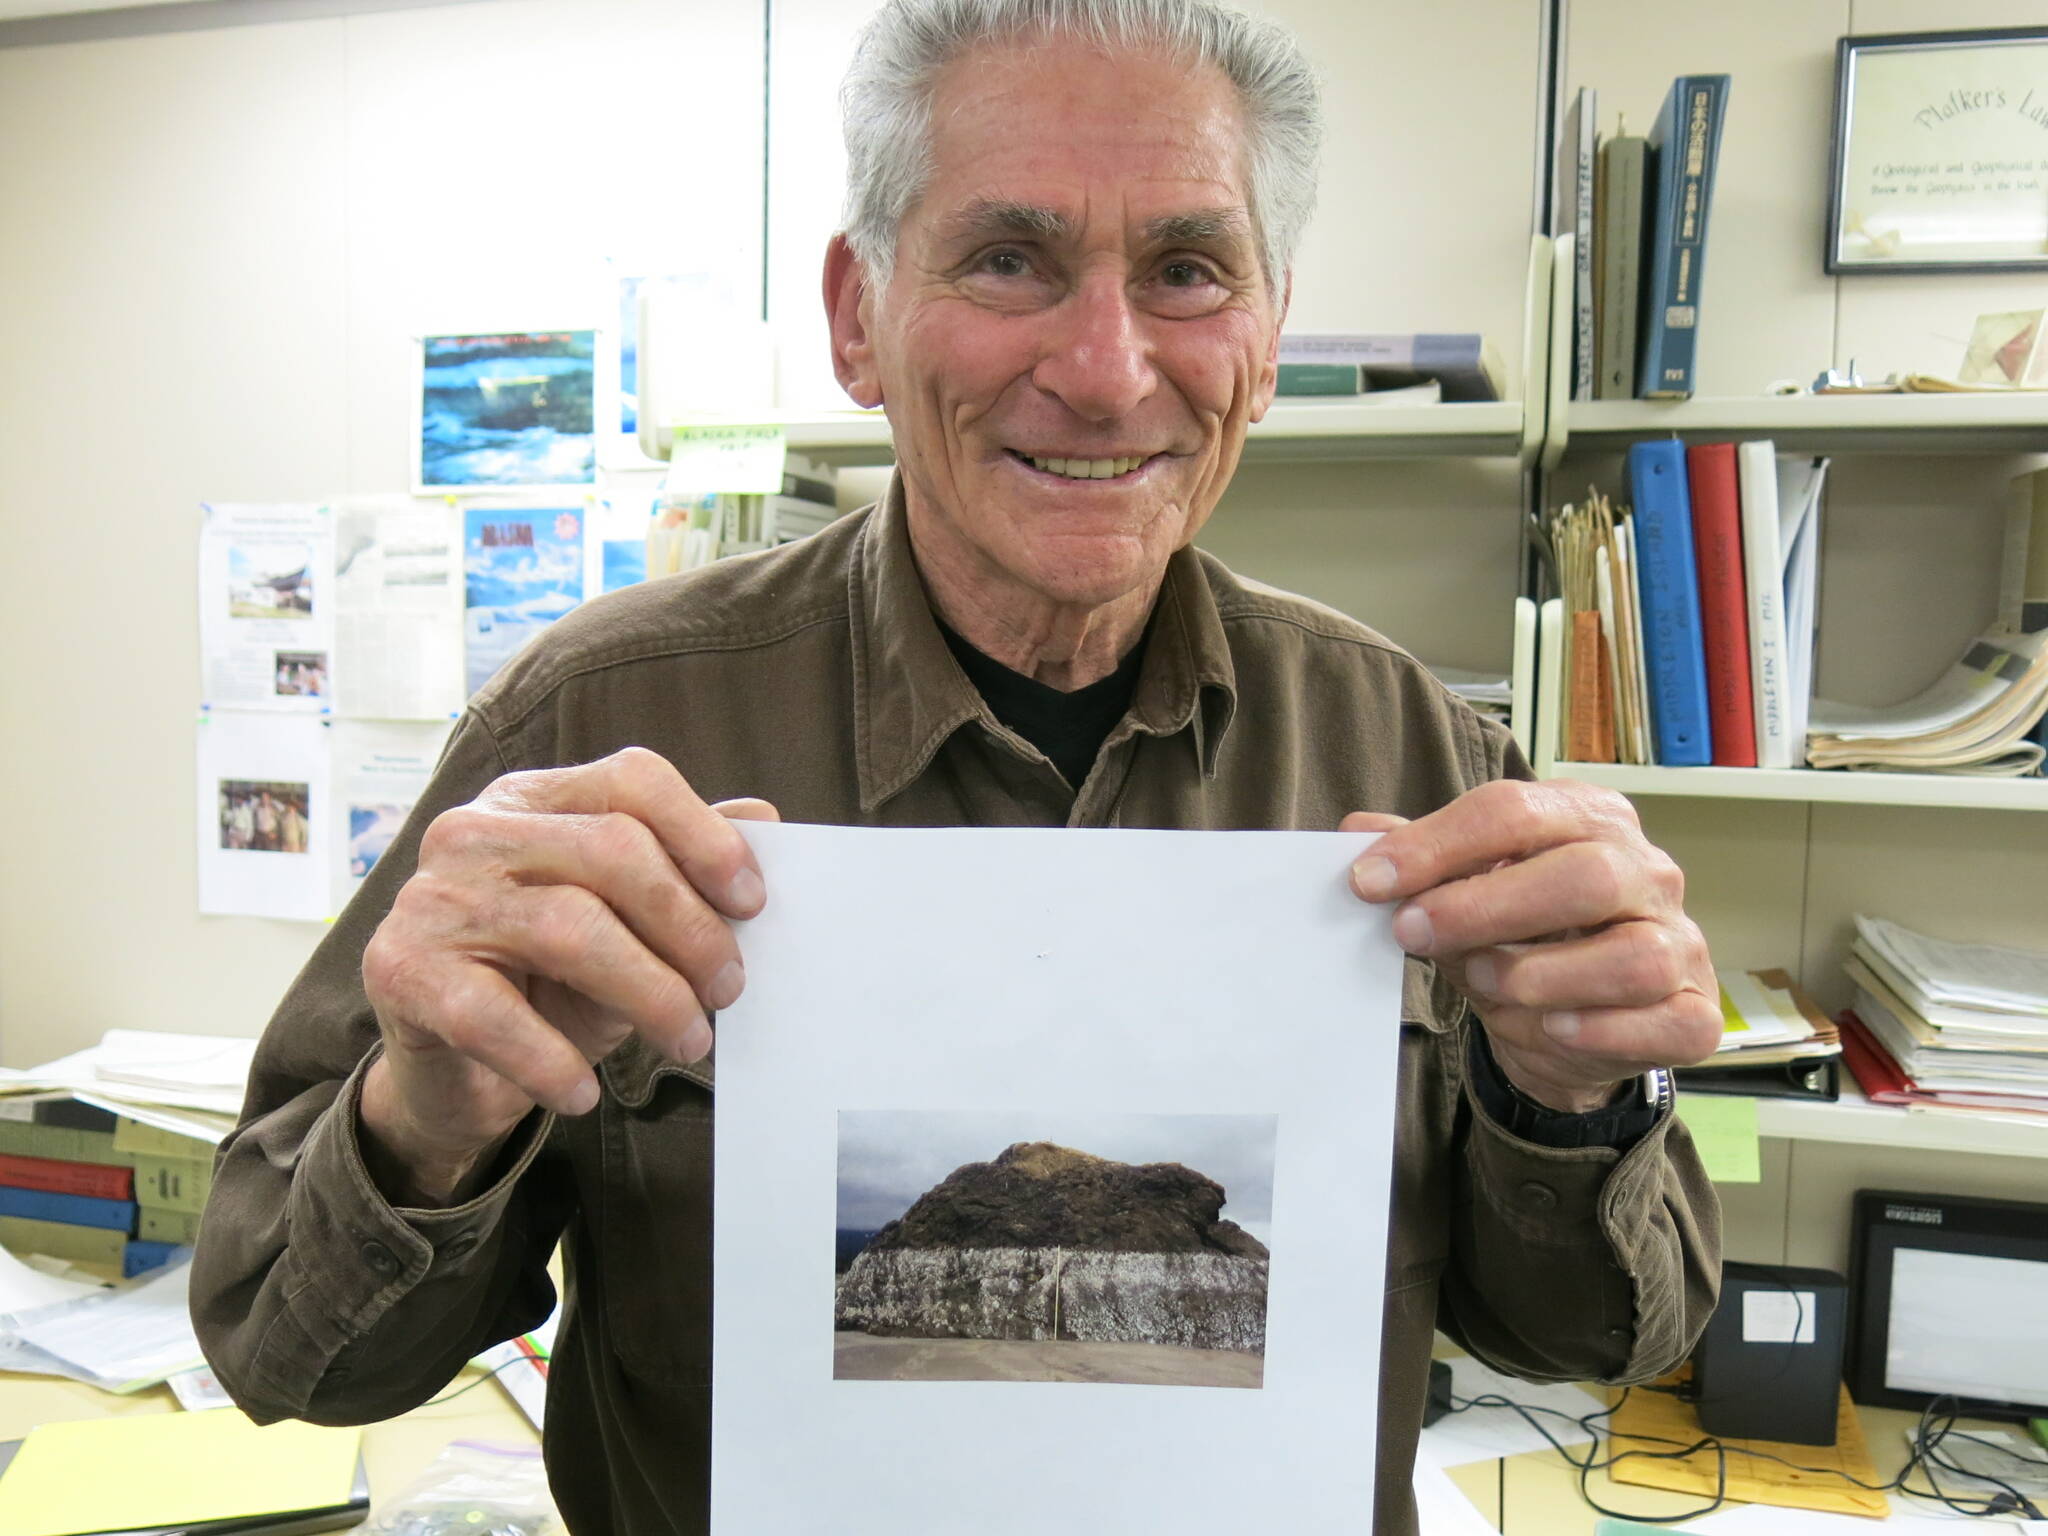 George Plafker holds up a photo of uplifted Alaska shorelines he took after visiting the southern coast following the March 1964 magnitude 9.2 earthquake. Plafker was standing in his office in Menlo Park, California, when this photo was taken in 2013. (Photo by Ned Rozell)